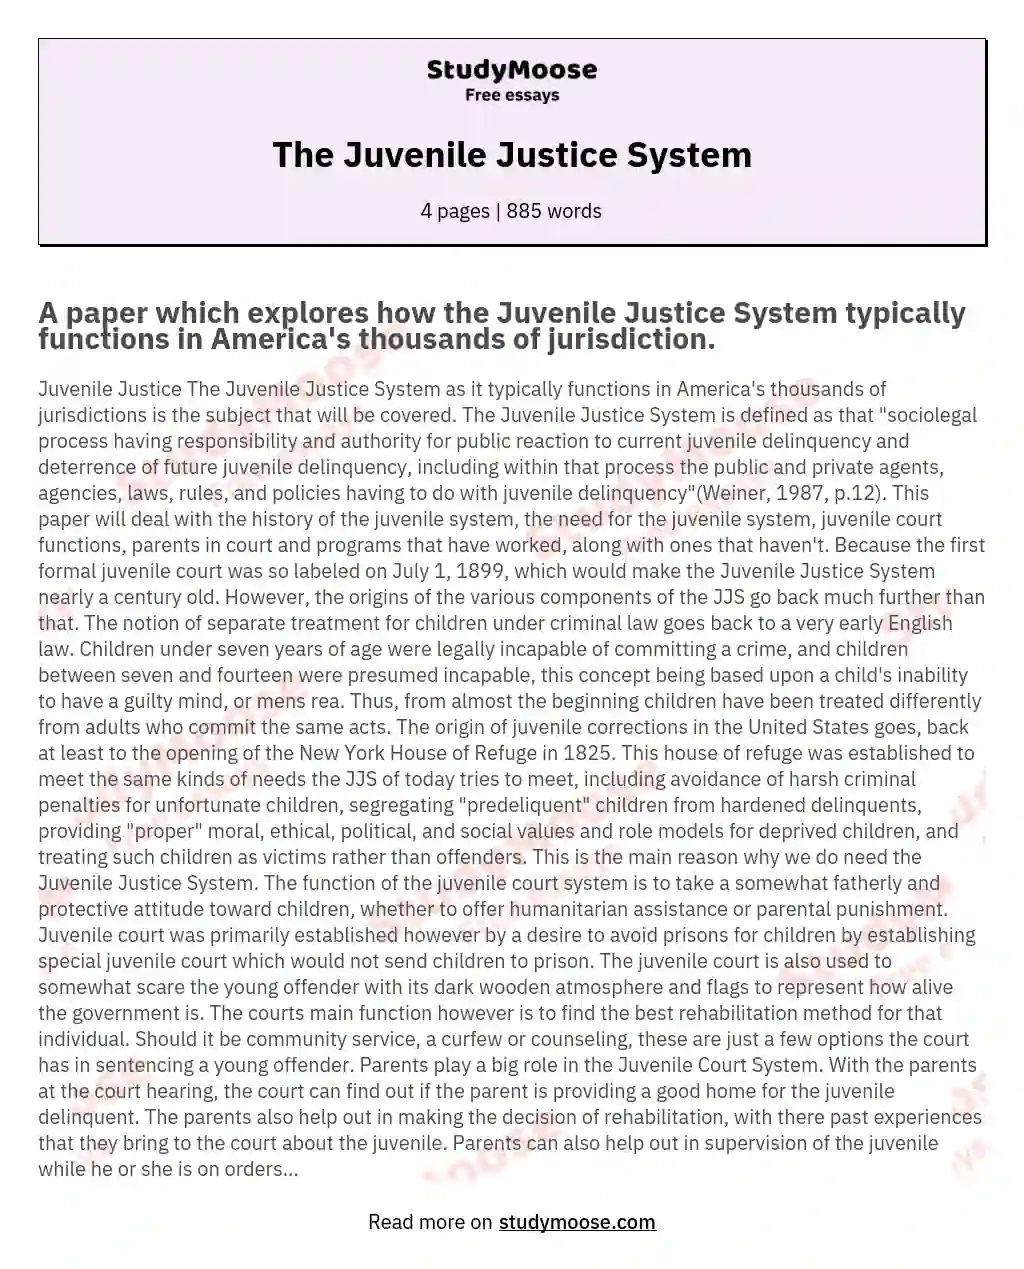 The Juvenile Justice System essay